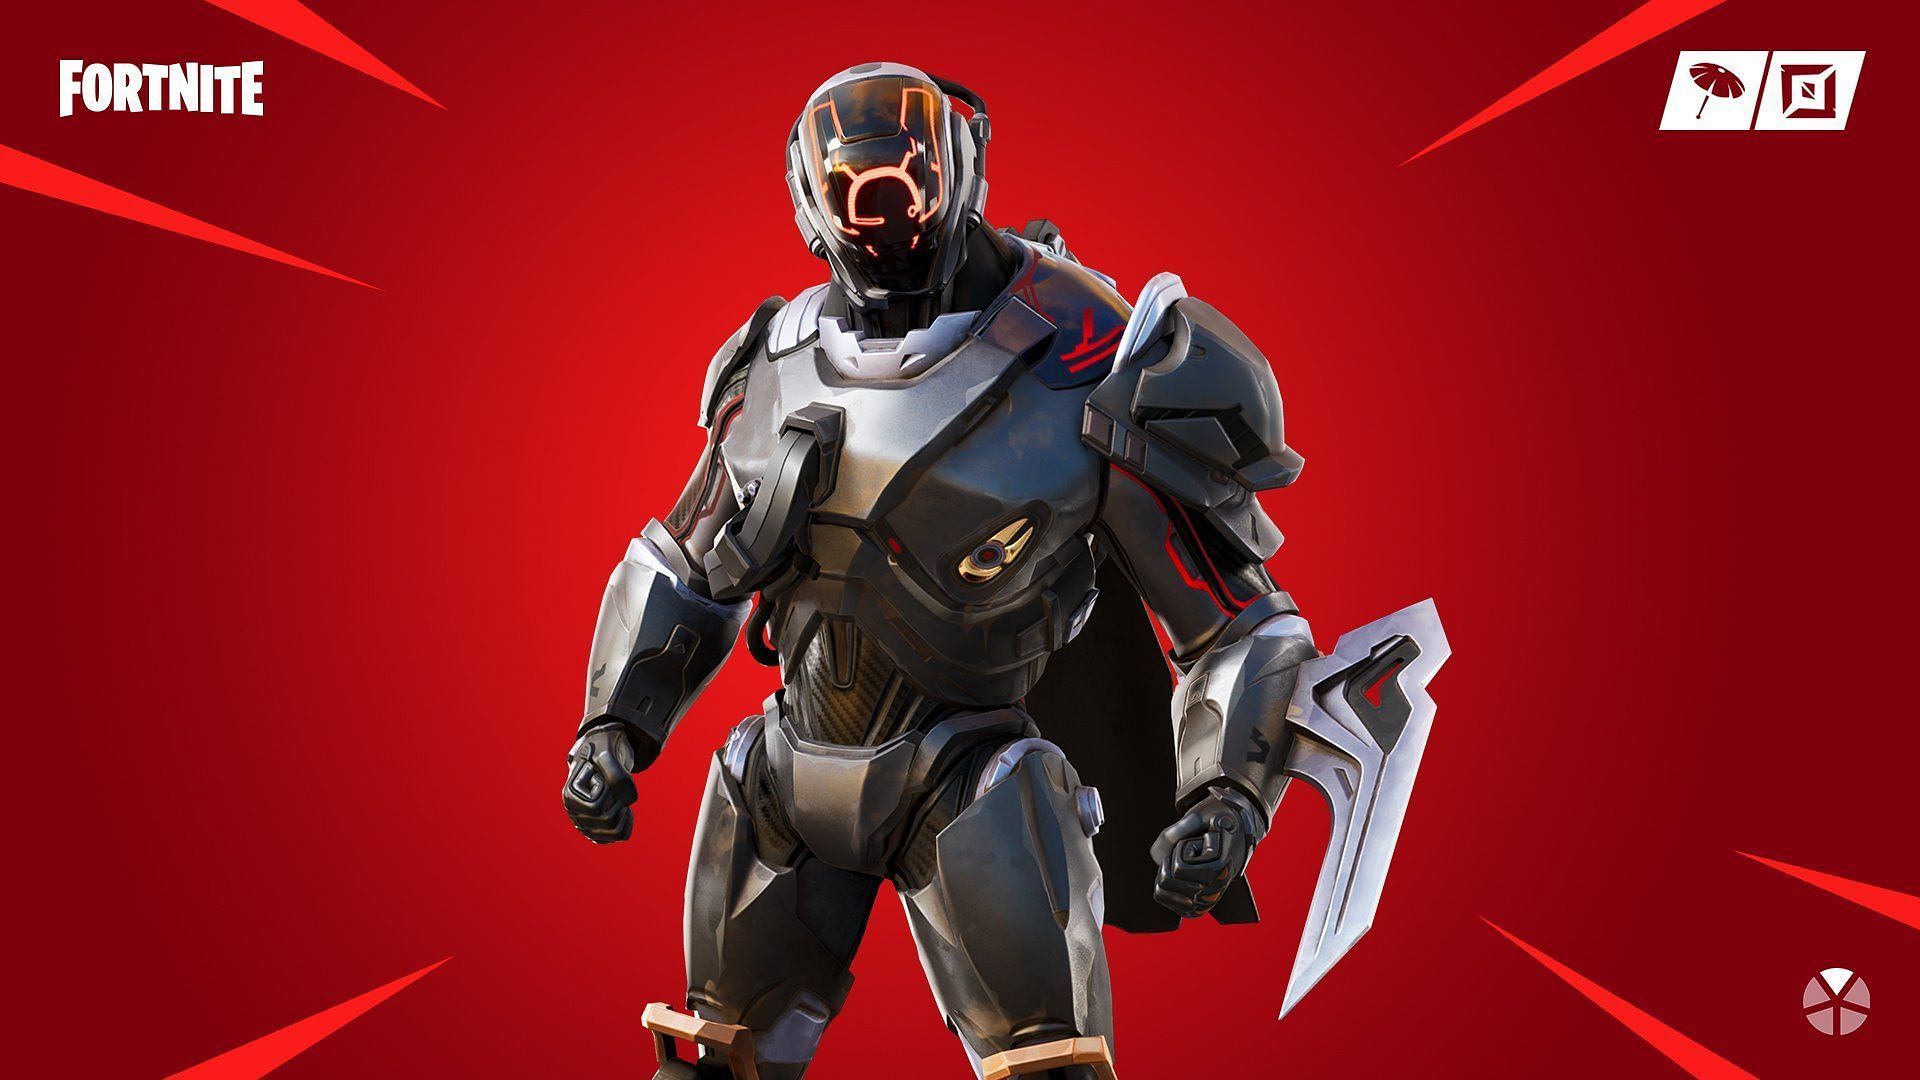 Secret skins were one of the best things about OG Fortnite (Image via Epic Games)